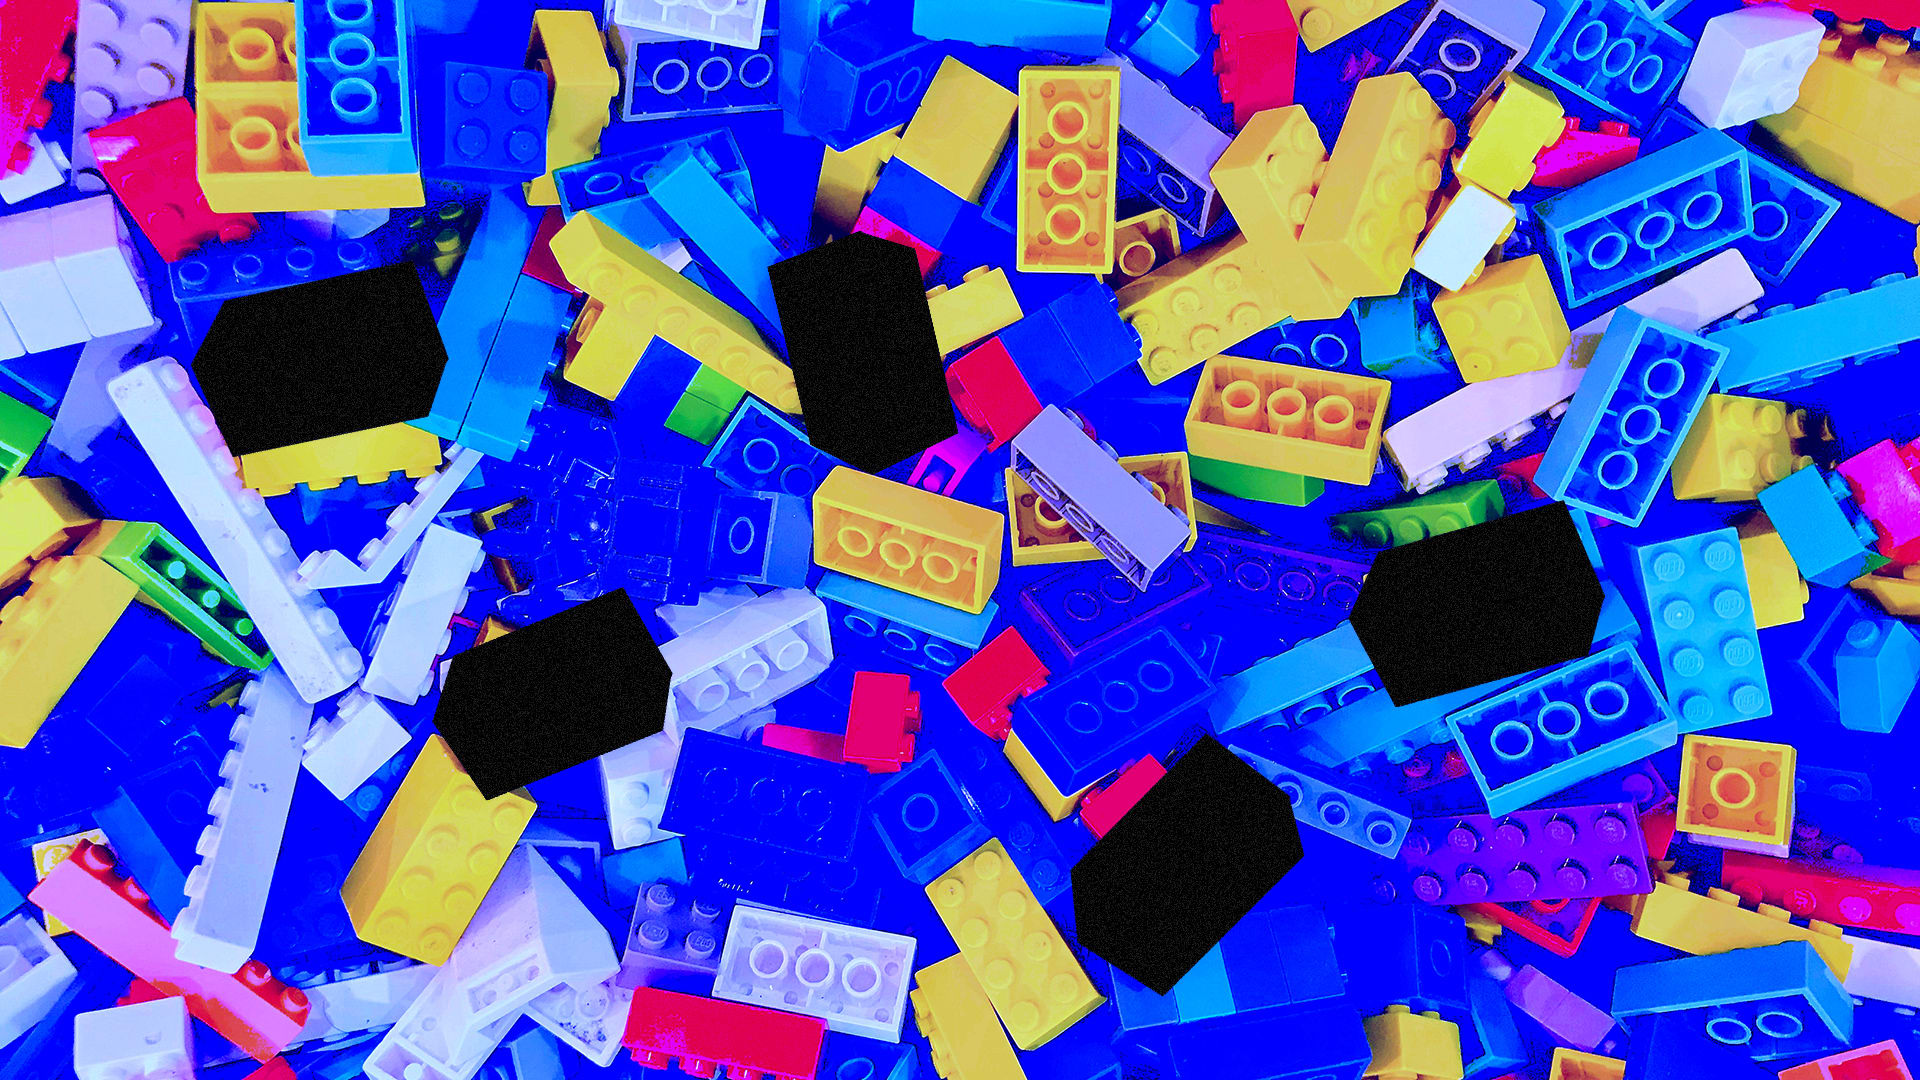 A Customer Discovered Their $350 Lego Set Was Missing Pieces. The Company’s Response Was Brilliant